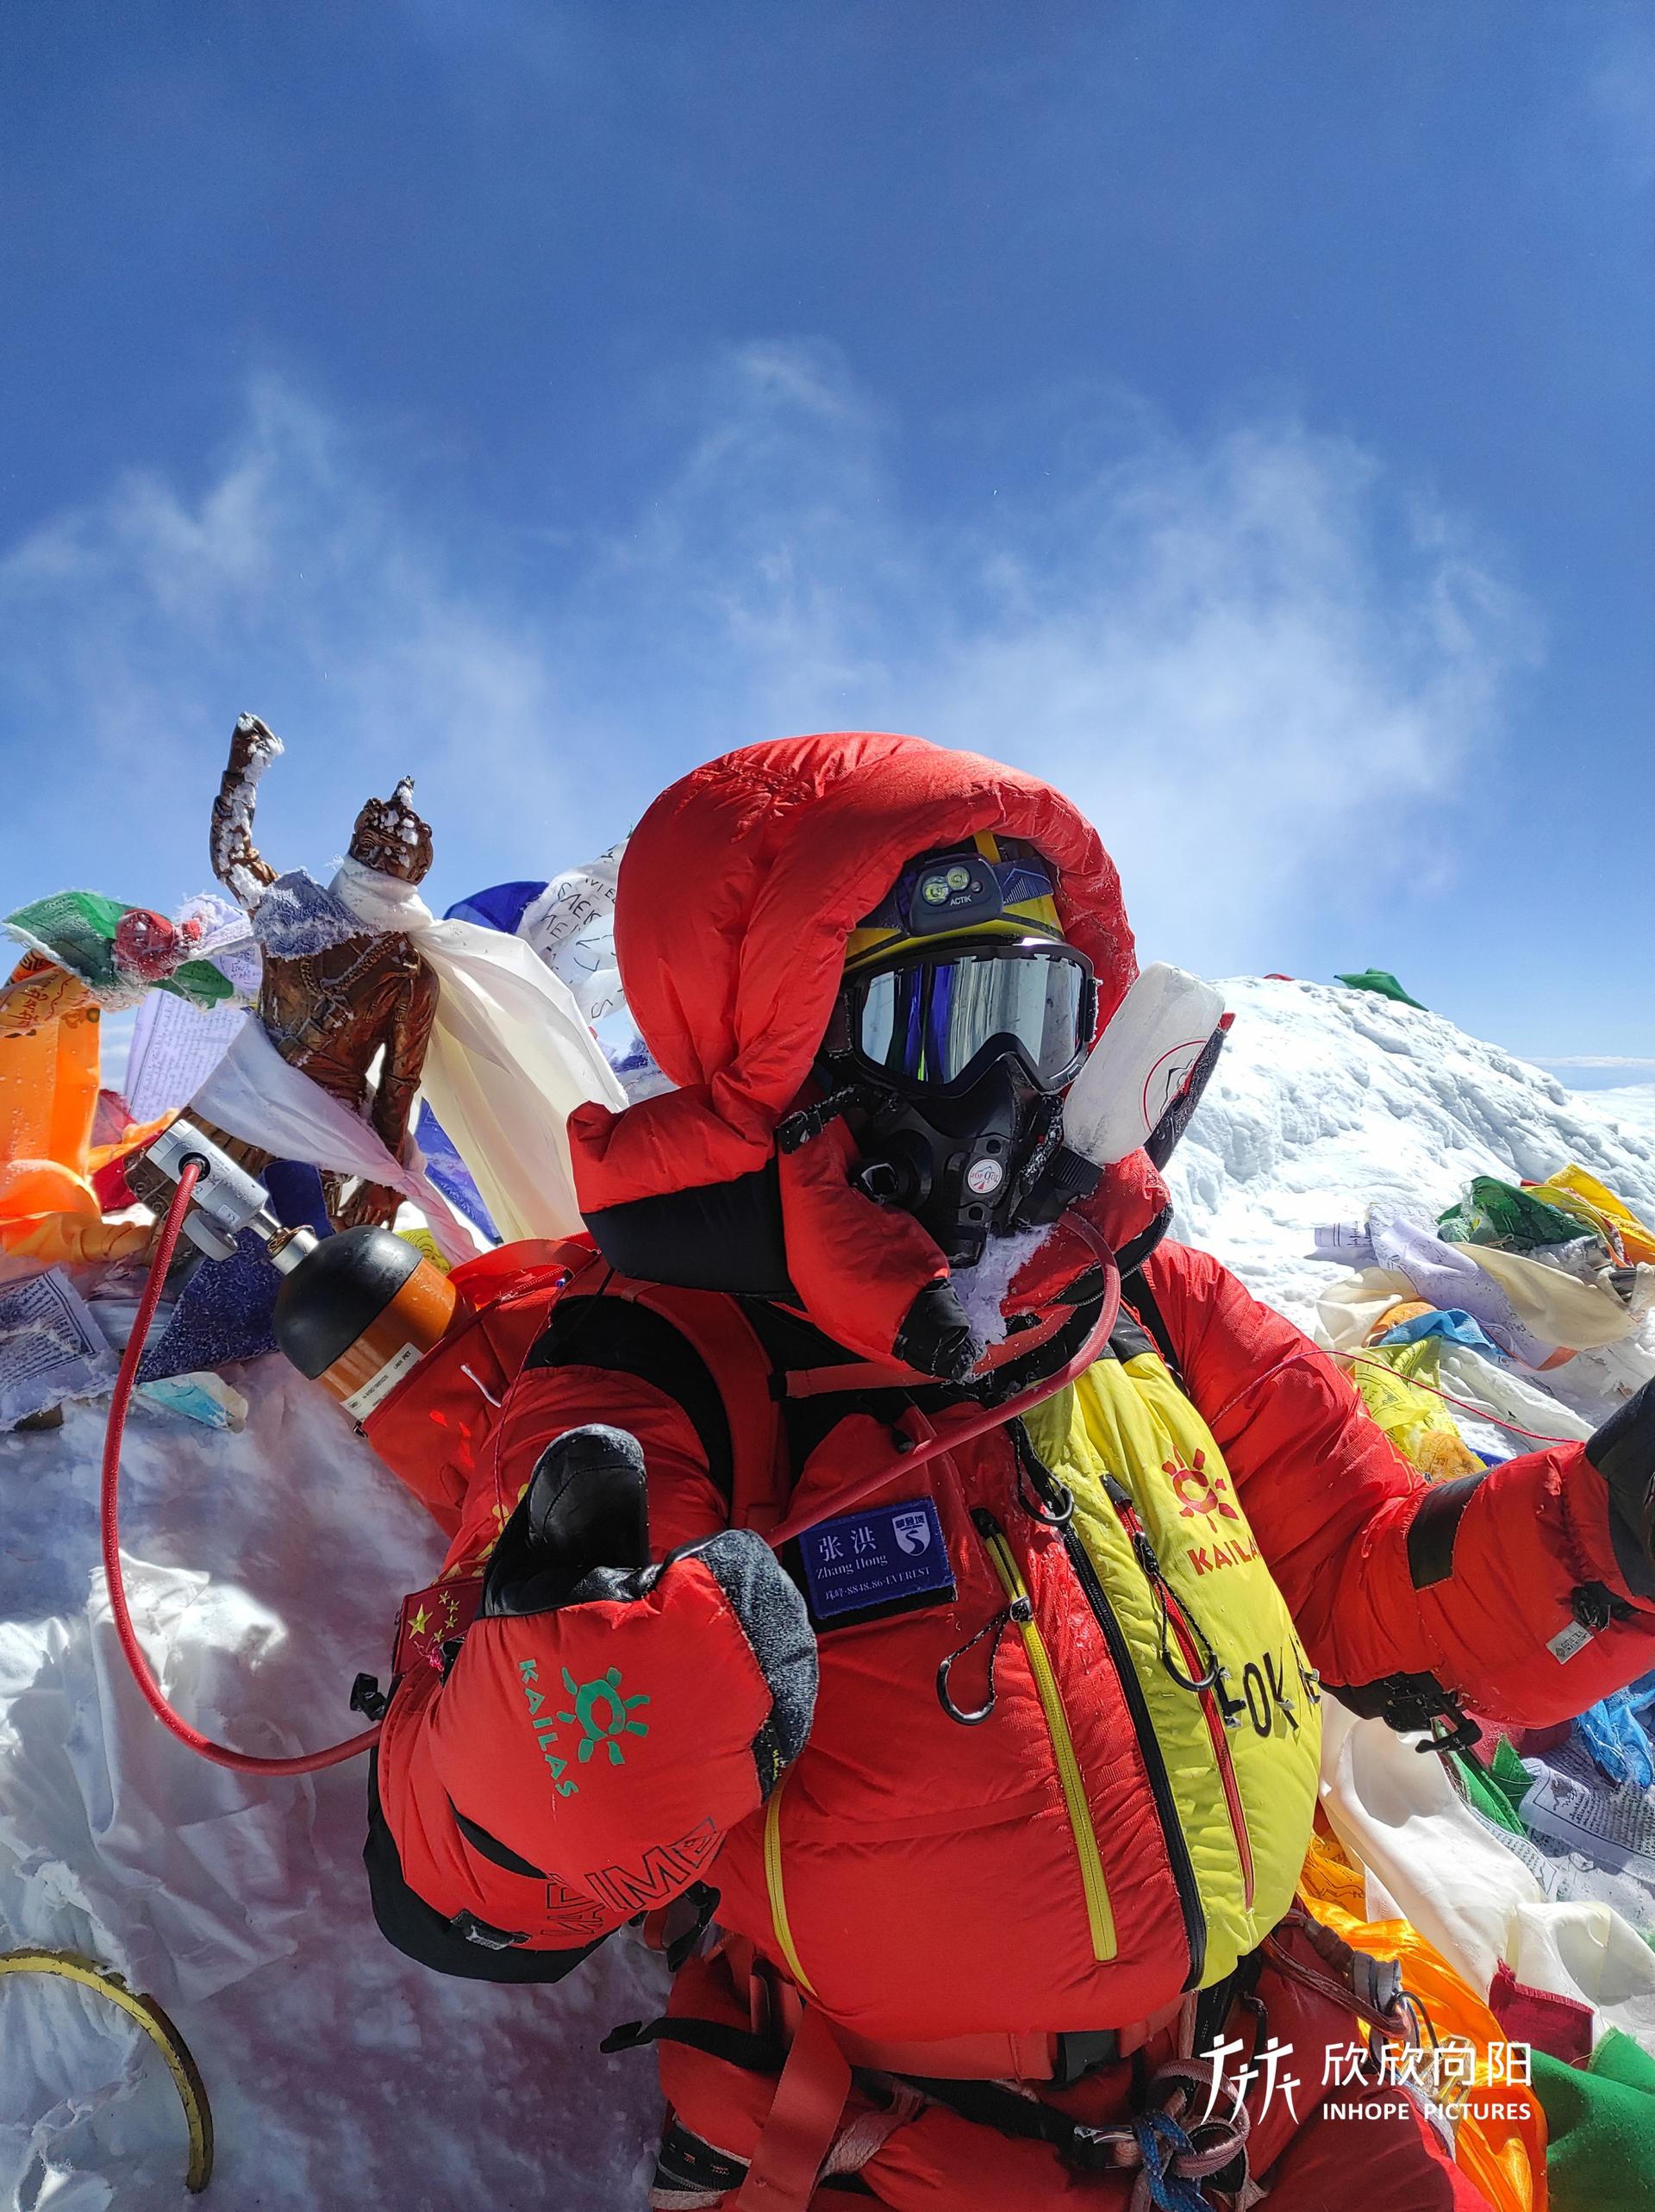 Man in a red coat amid a snowy Mount Everest